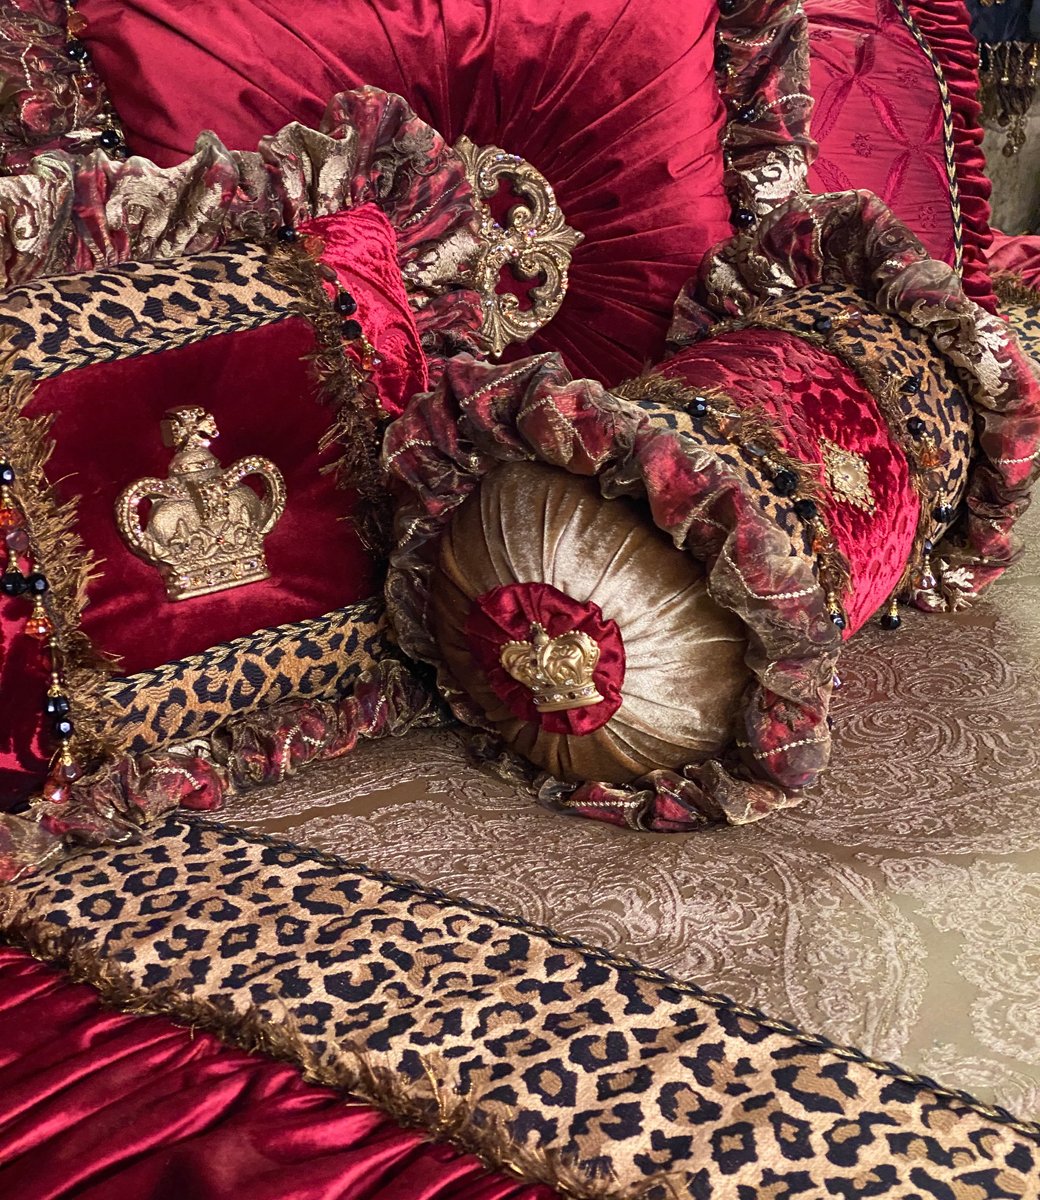 Flowers And Leopard Pattern Louis Vuitton Bedding Sets Bed Sets